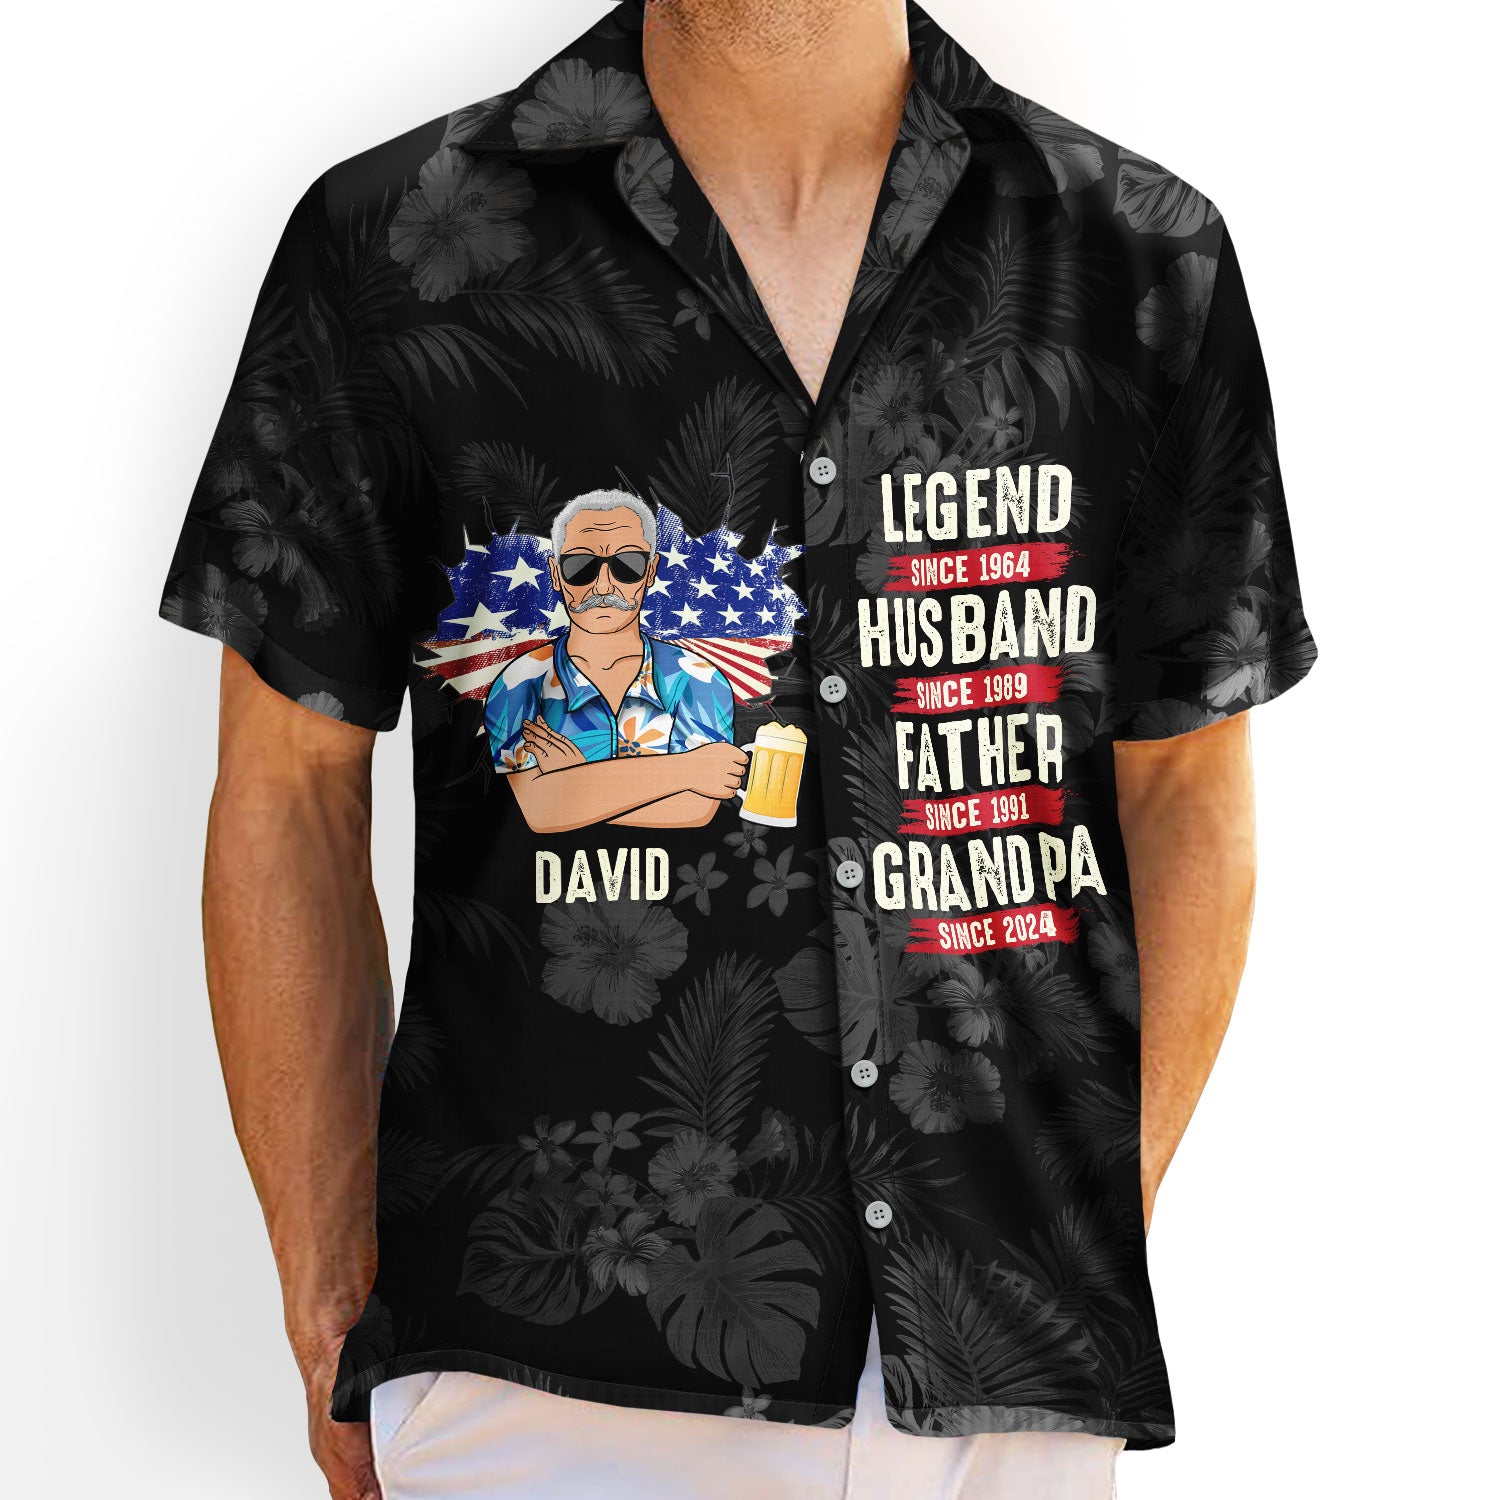 Stars And Stripes, Legend Husband Father Grandpa - Gift For Dad, Daddy, Grandfather - Personalized Hawaiian Shirt